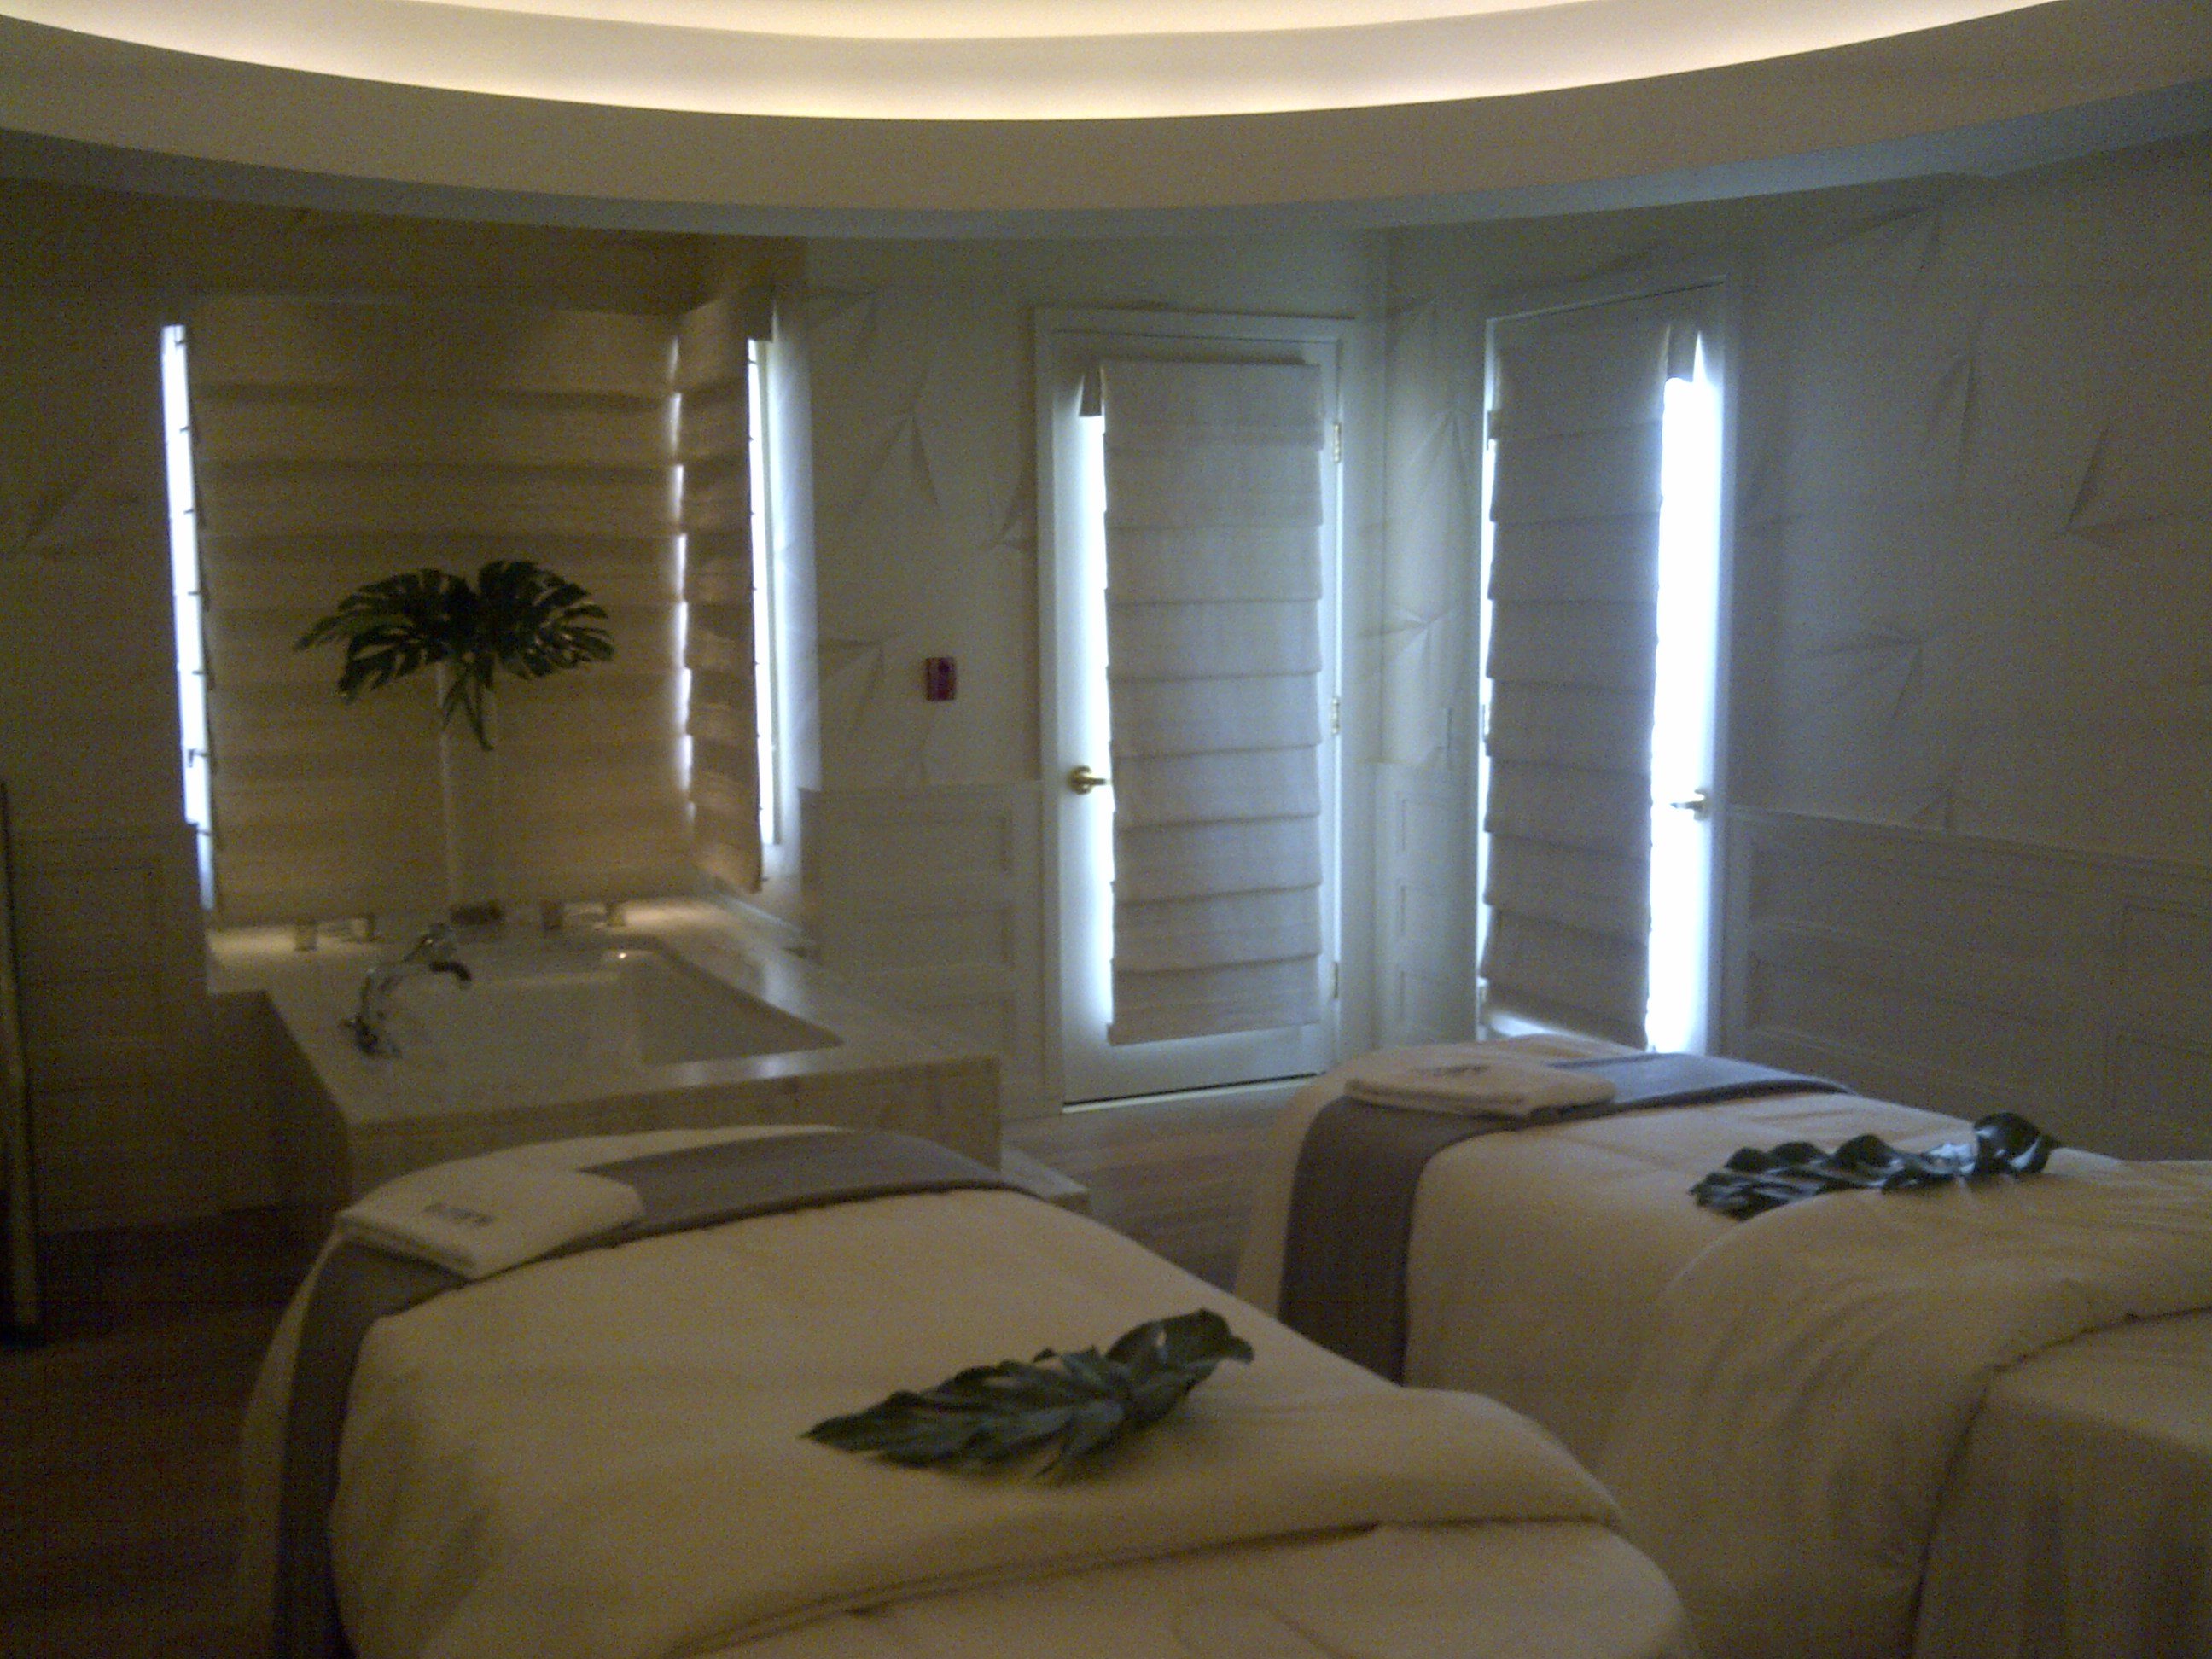 Luxury Spa Treatments At Hotel Bel-Air